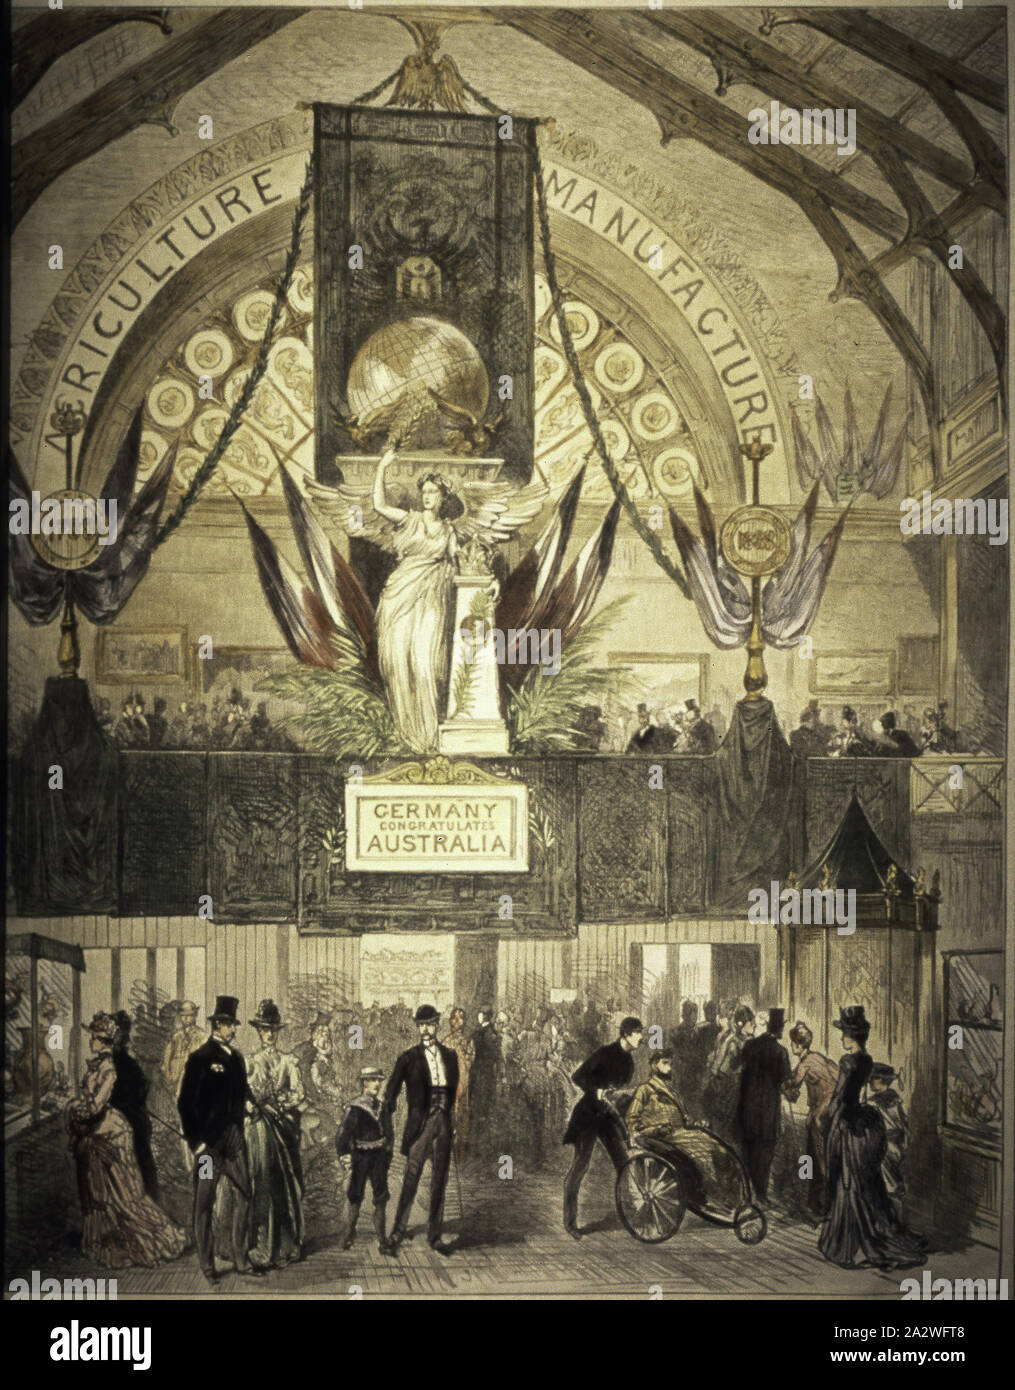 Print - 'Victory', The Illustrated London News, 29 Sep 1888, Coloured print from the front page of the 'Illustrated London News', 29 September 1888, of an illustration by R Taylor of the German statue 'Victory', exhibited above the southern entrance of the (Royal) Exhibition Building during the Melbourne Centennial International Exhibition, 1 August 1888 - 31 January 1889 Stock Photo